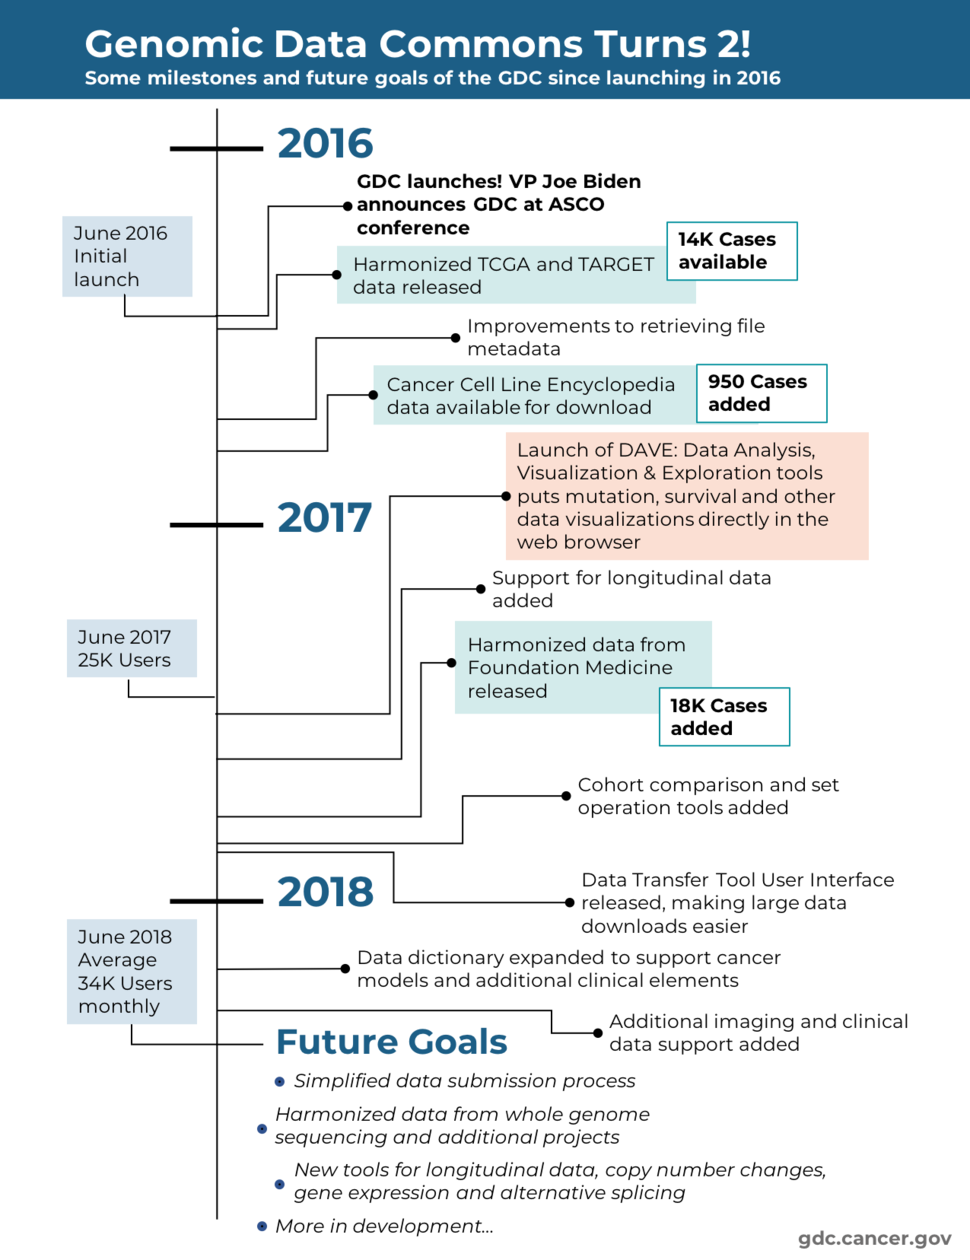 Genomic Data Commons milestones and future goals since launching in 2016